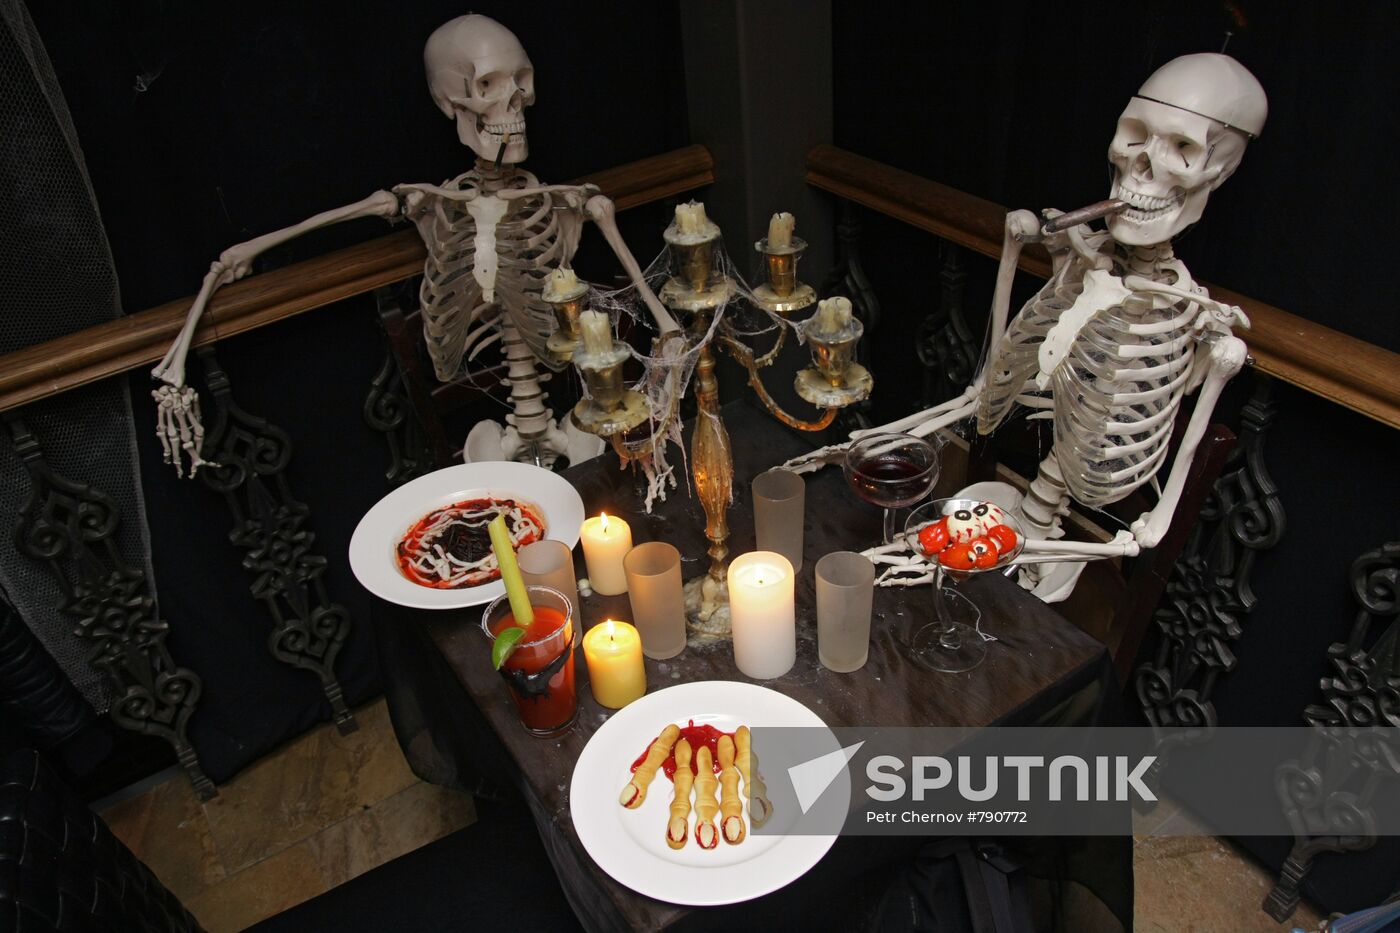 Halloween specials at a Moscow restaurant